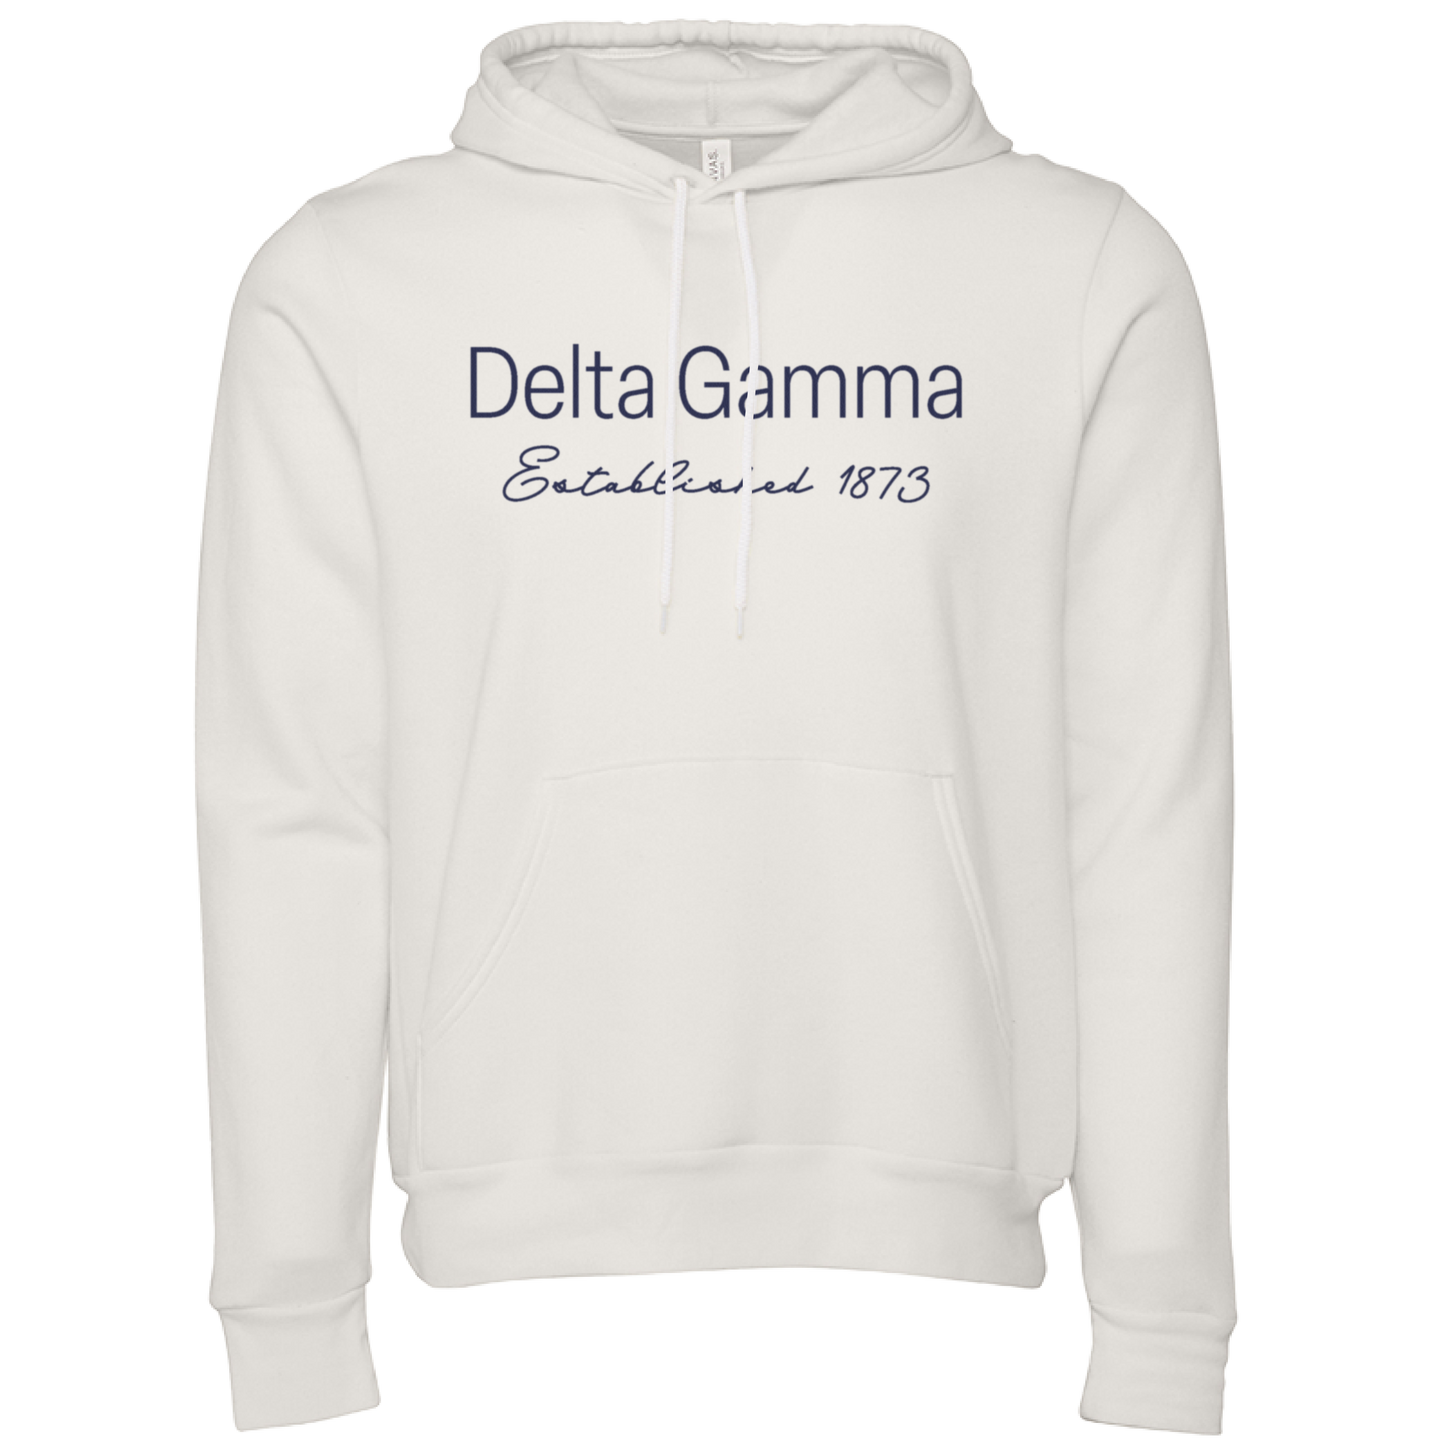 Delta Gamma Embroidered Printed Name Hooded Sweatshirts